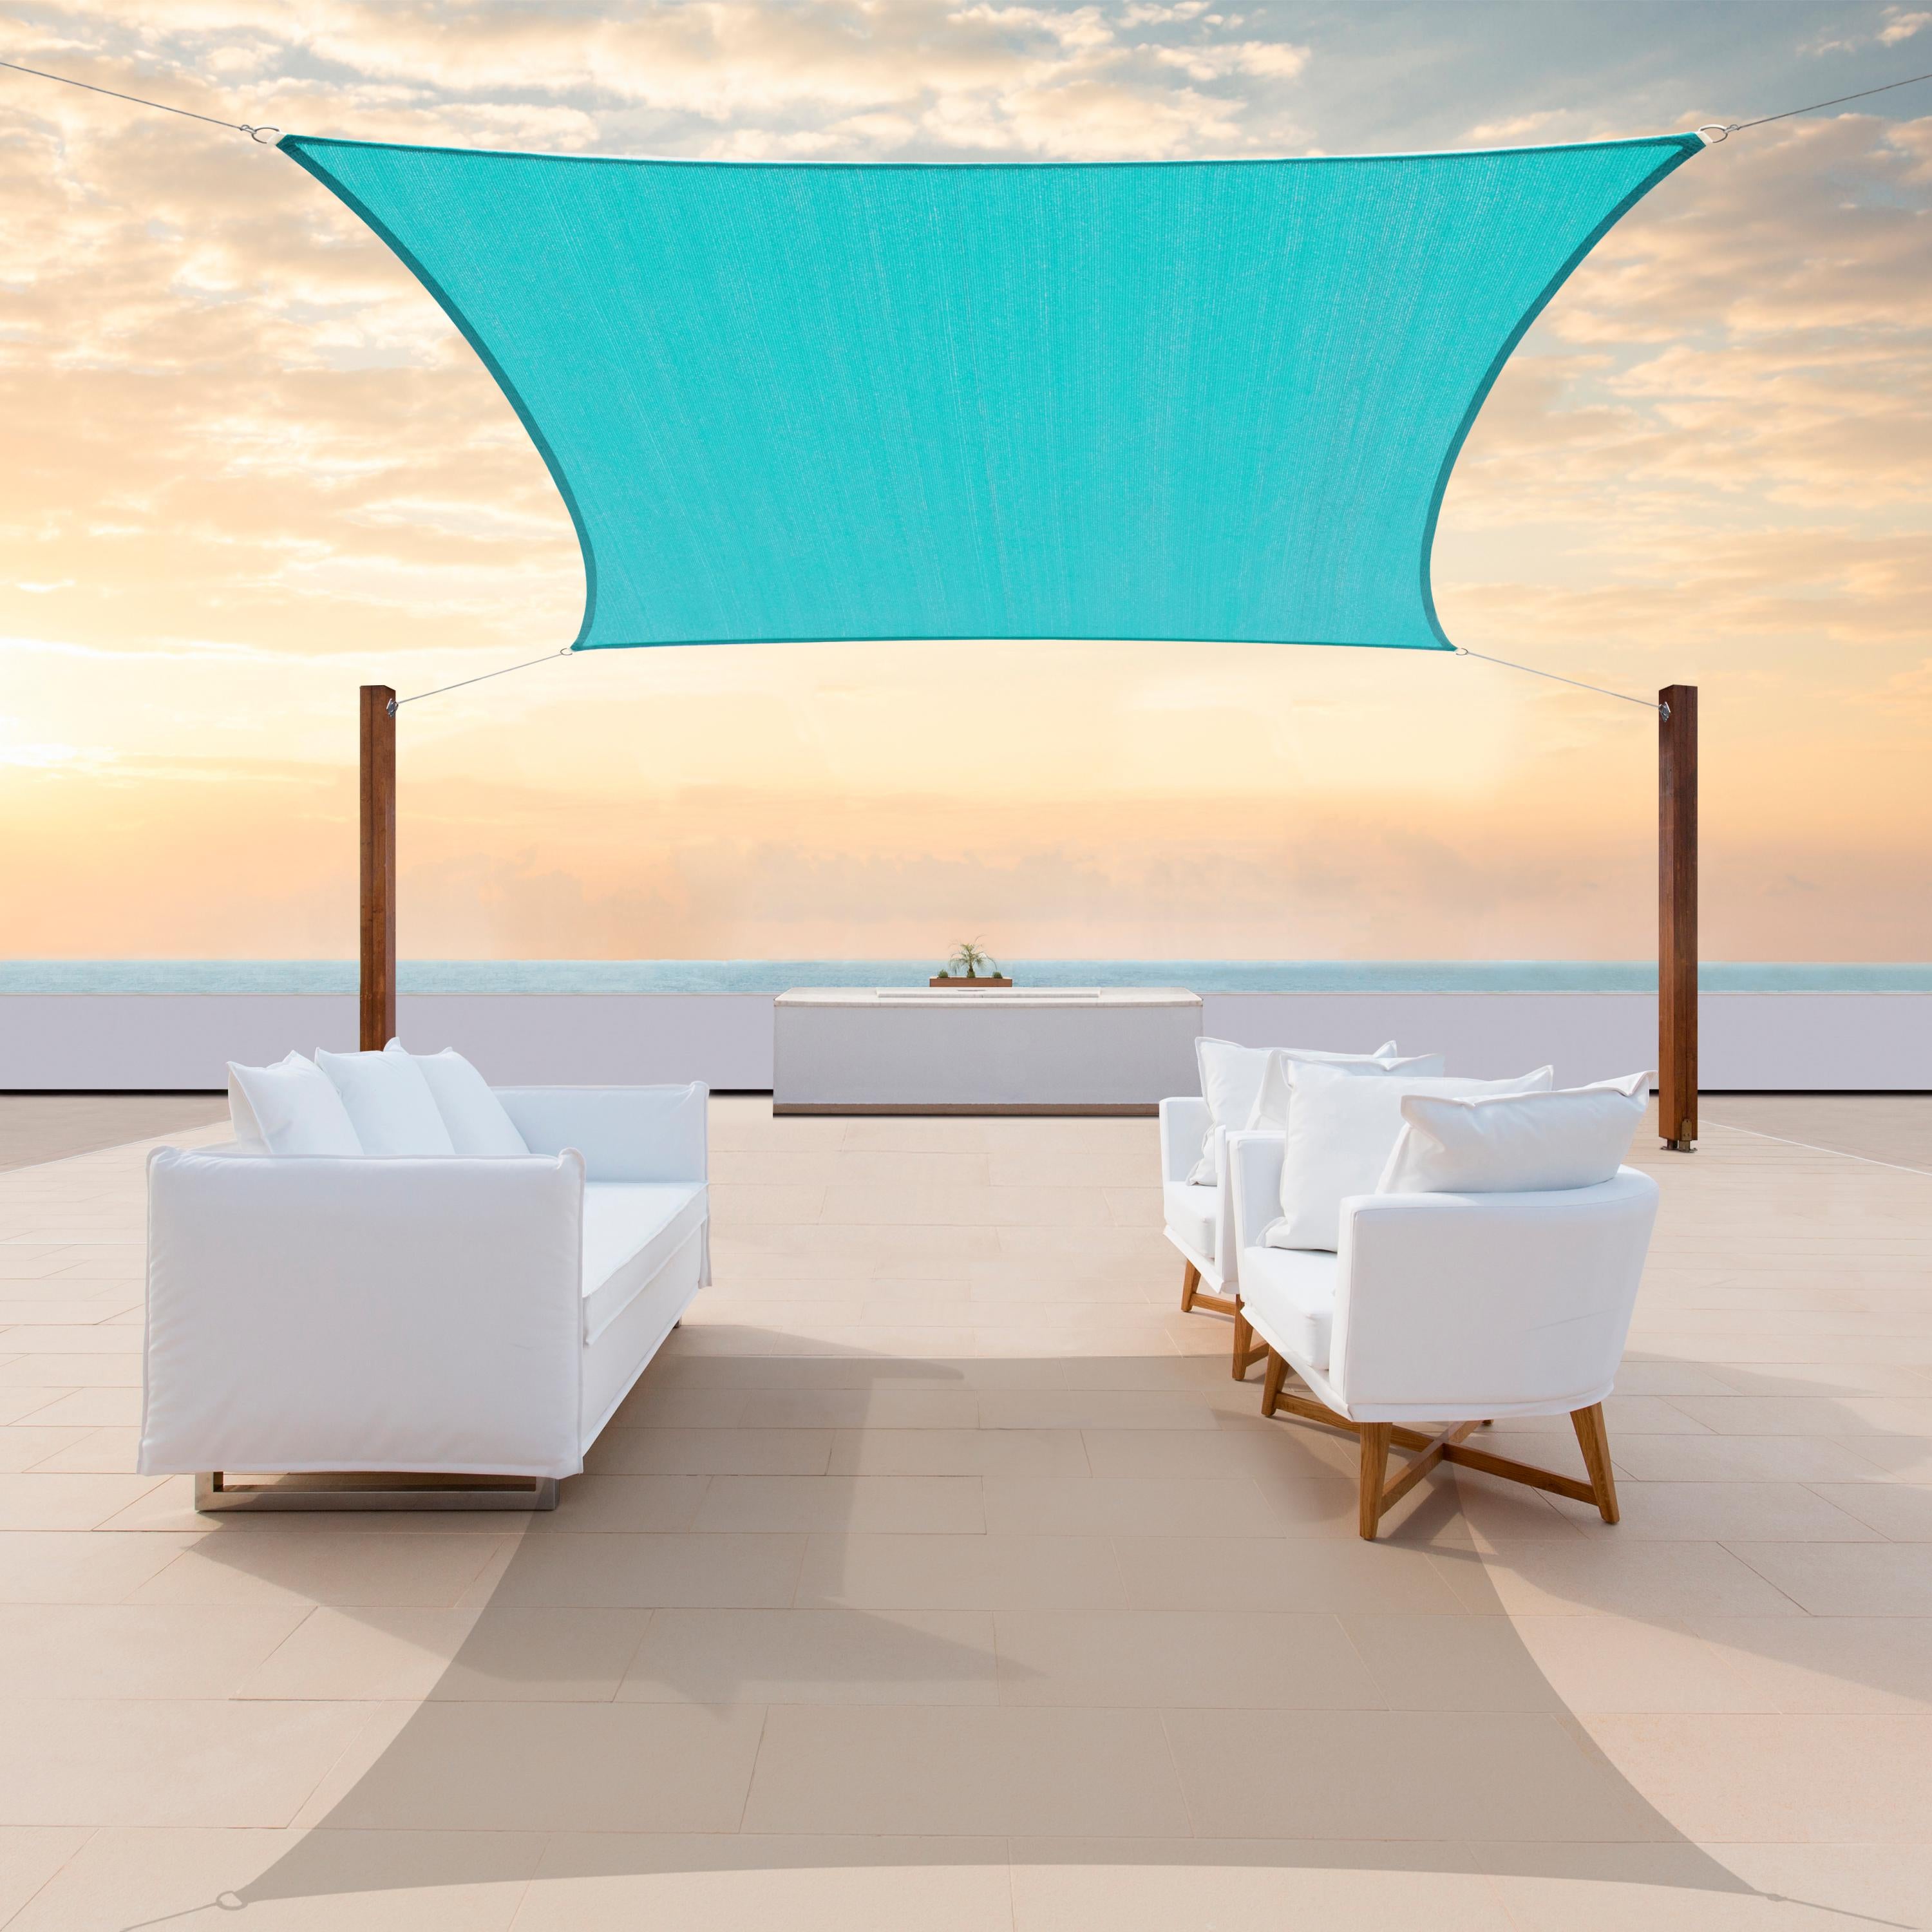 Rectangle Sun Shade Sail Canopy, Commercial Grade, 14 Sizes, 7 Colors Sun Shade Sail Colourtree 16' x 20' Turquoise 